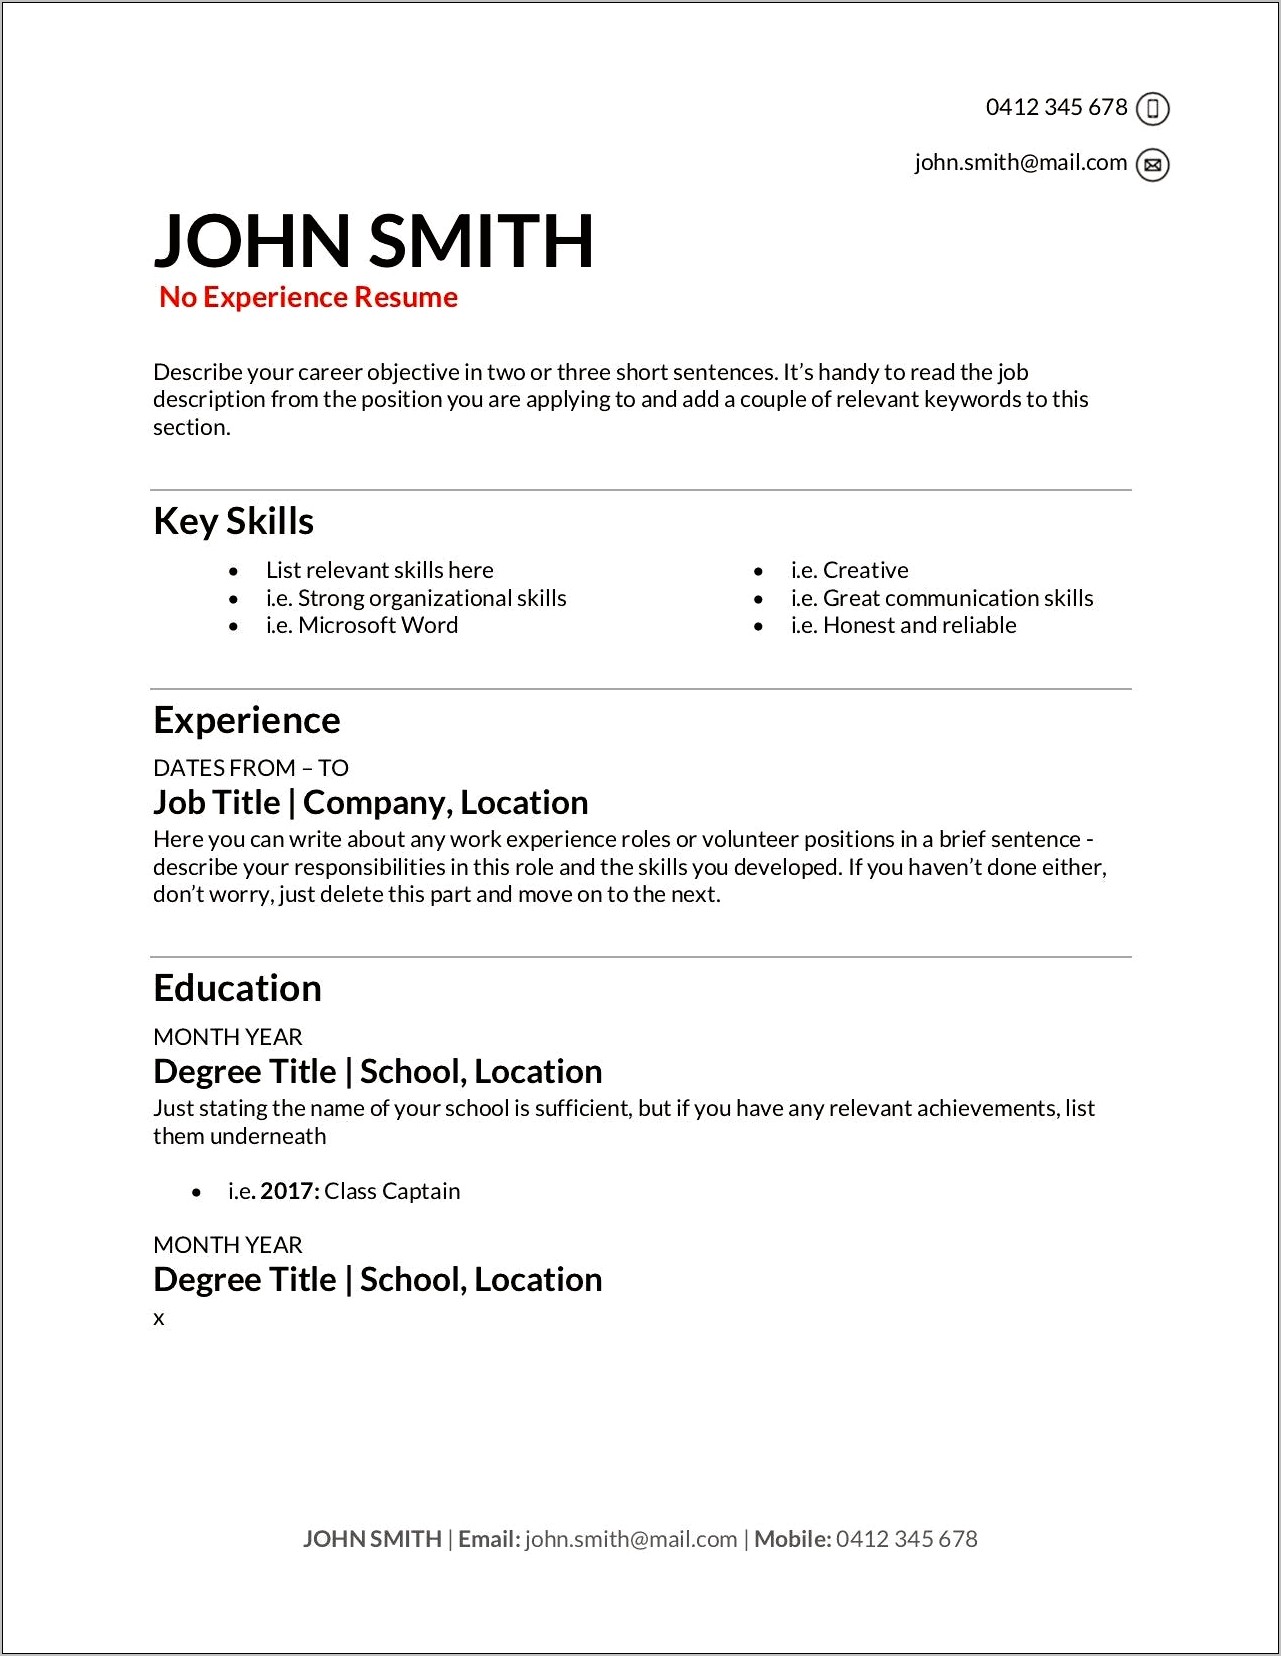 Resume Accomplishments For Someone With No Work Experience